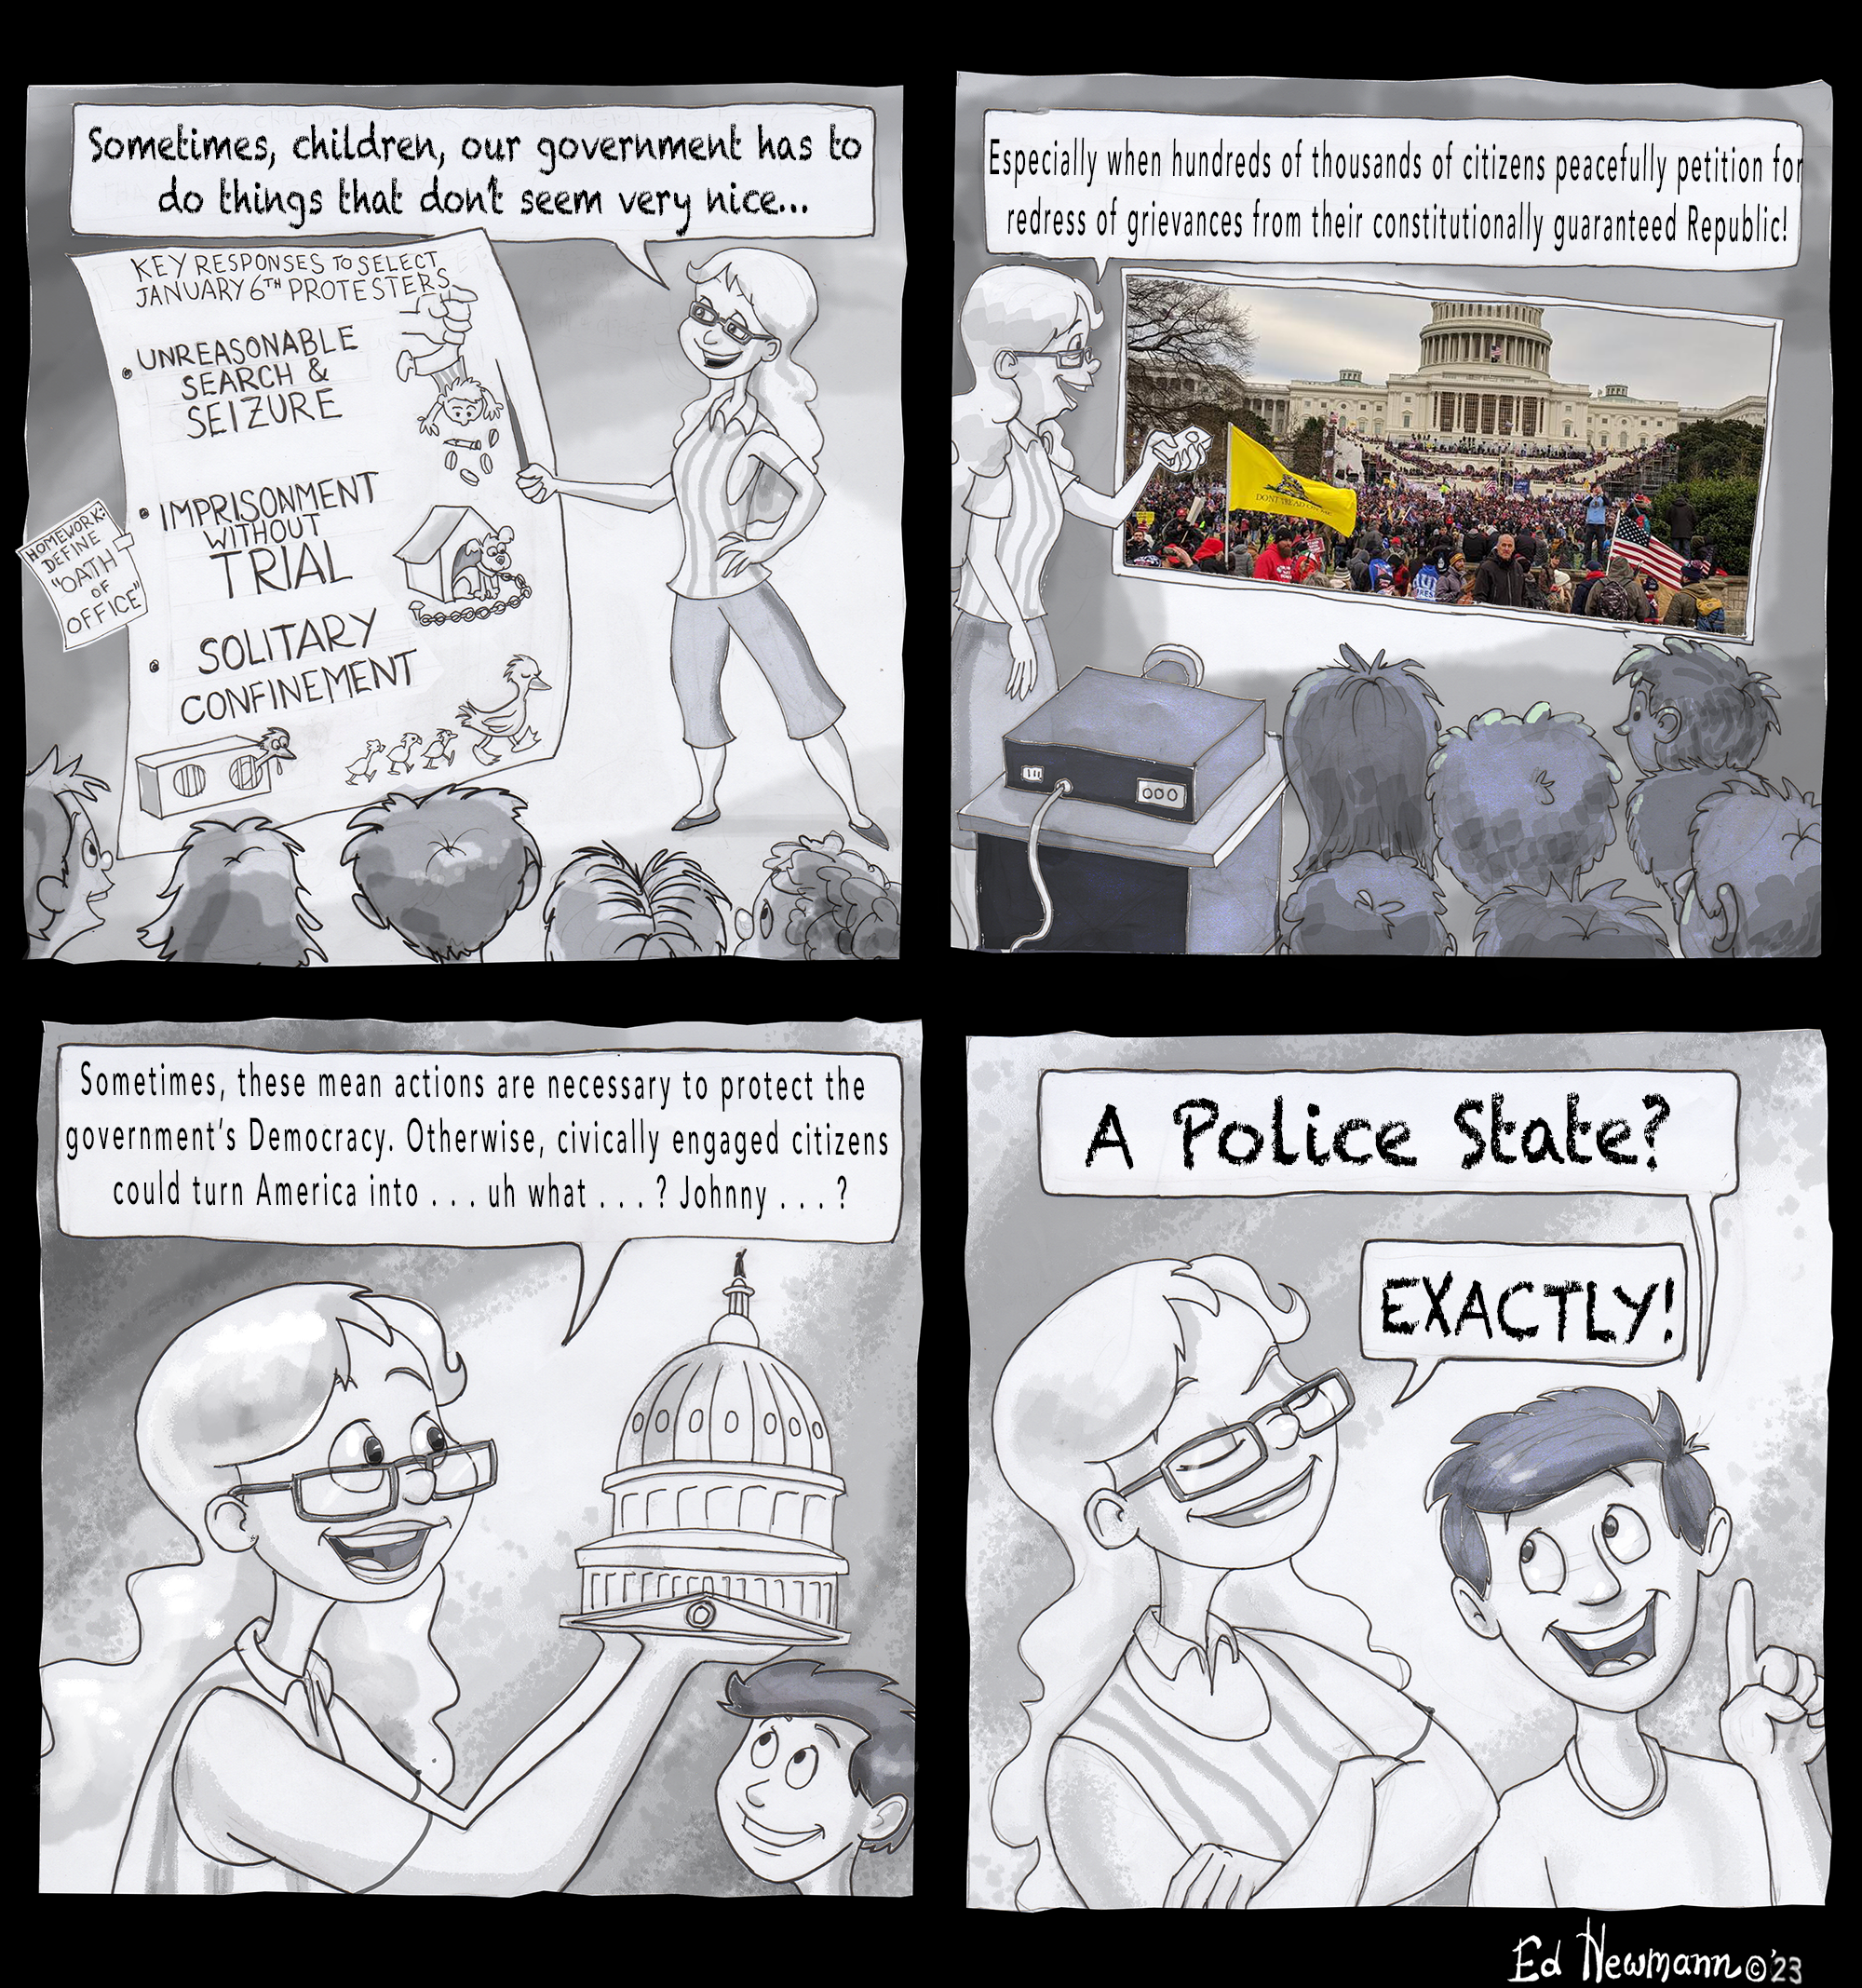 River Cities Reader January 2023 Ed Newman Cartoon Jan 6 Republic Democracy Police State.png